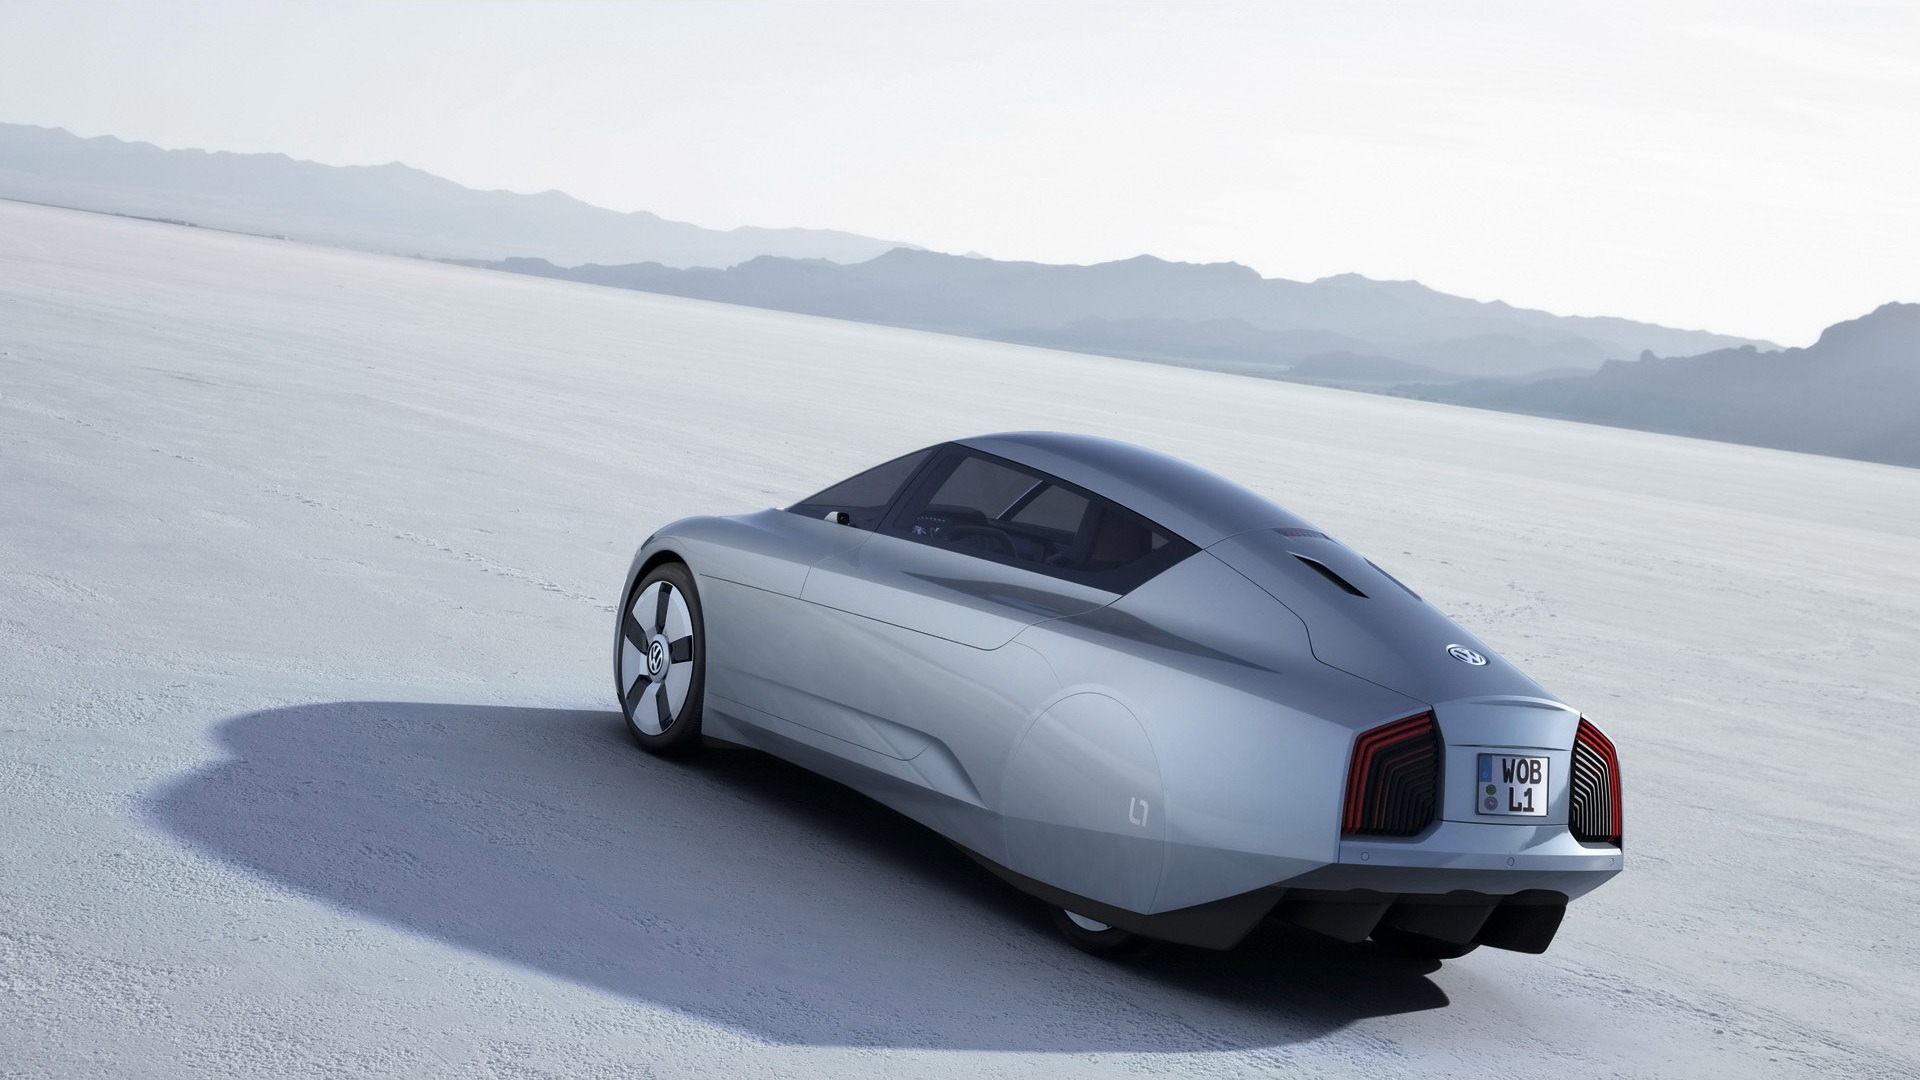 Volkswagen L1 Tapety Concept Car #15 - 1920x1080